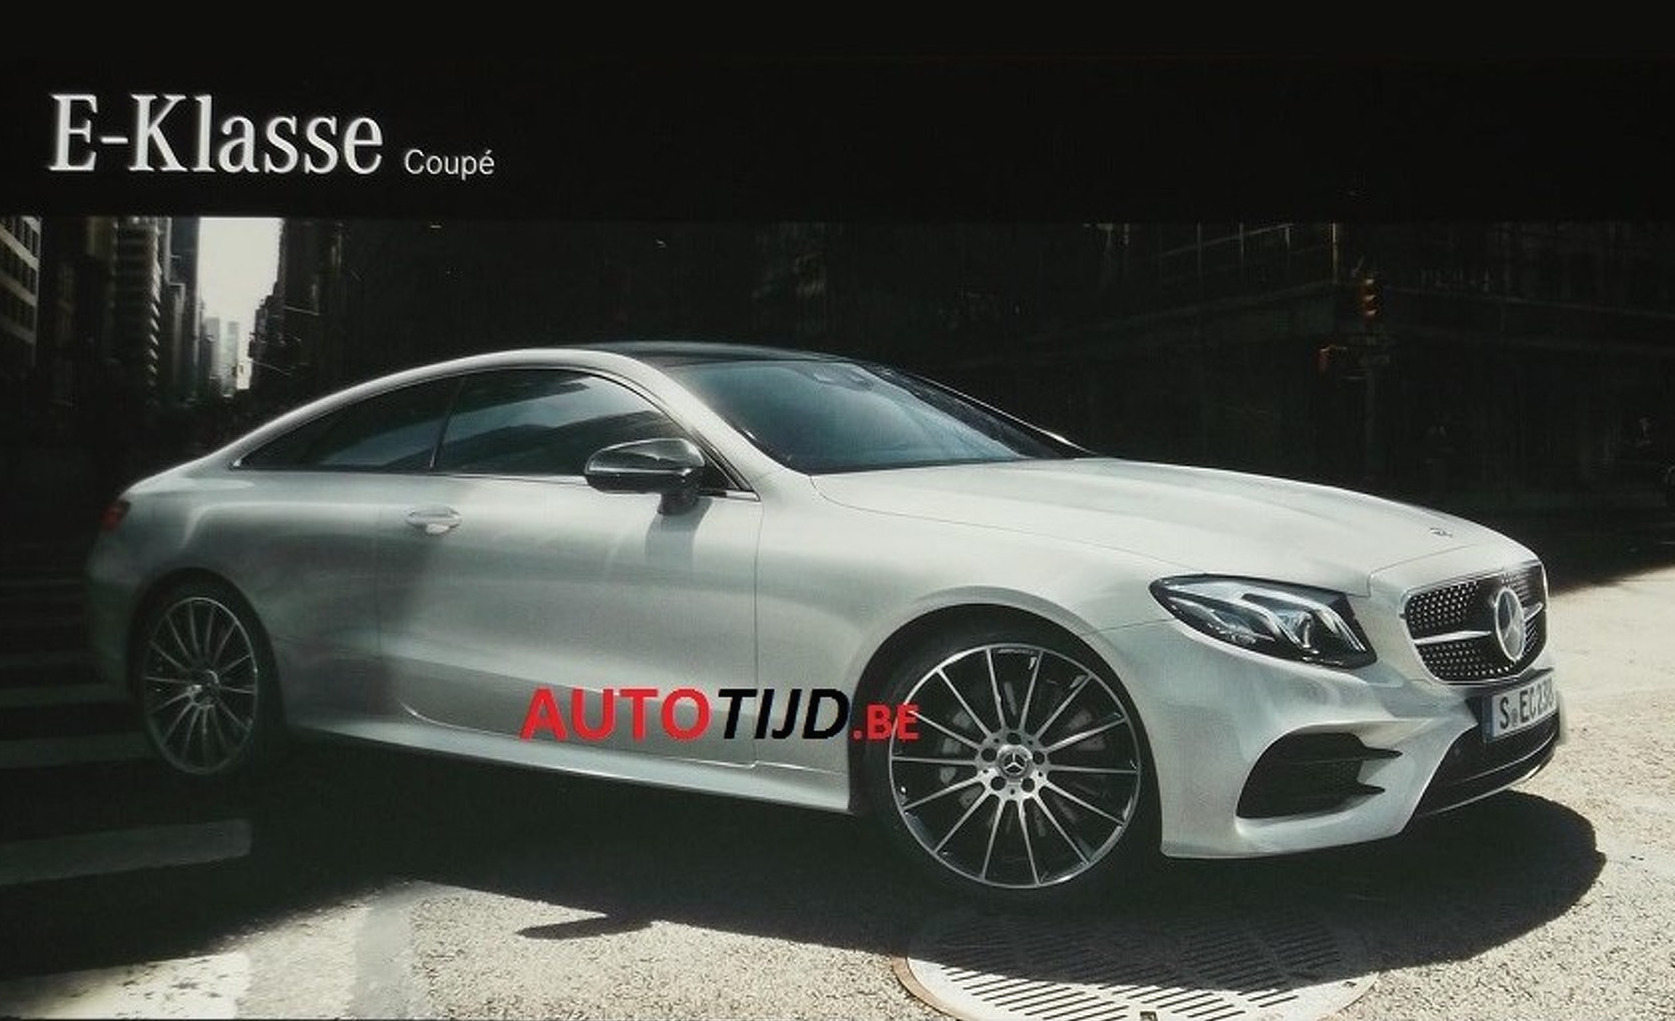 2017 Mercedes-Benz E-Class coupe revealed in brochure scans